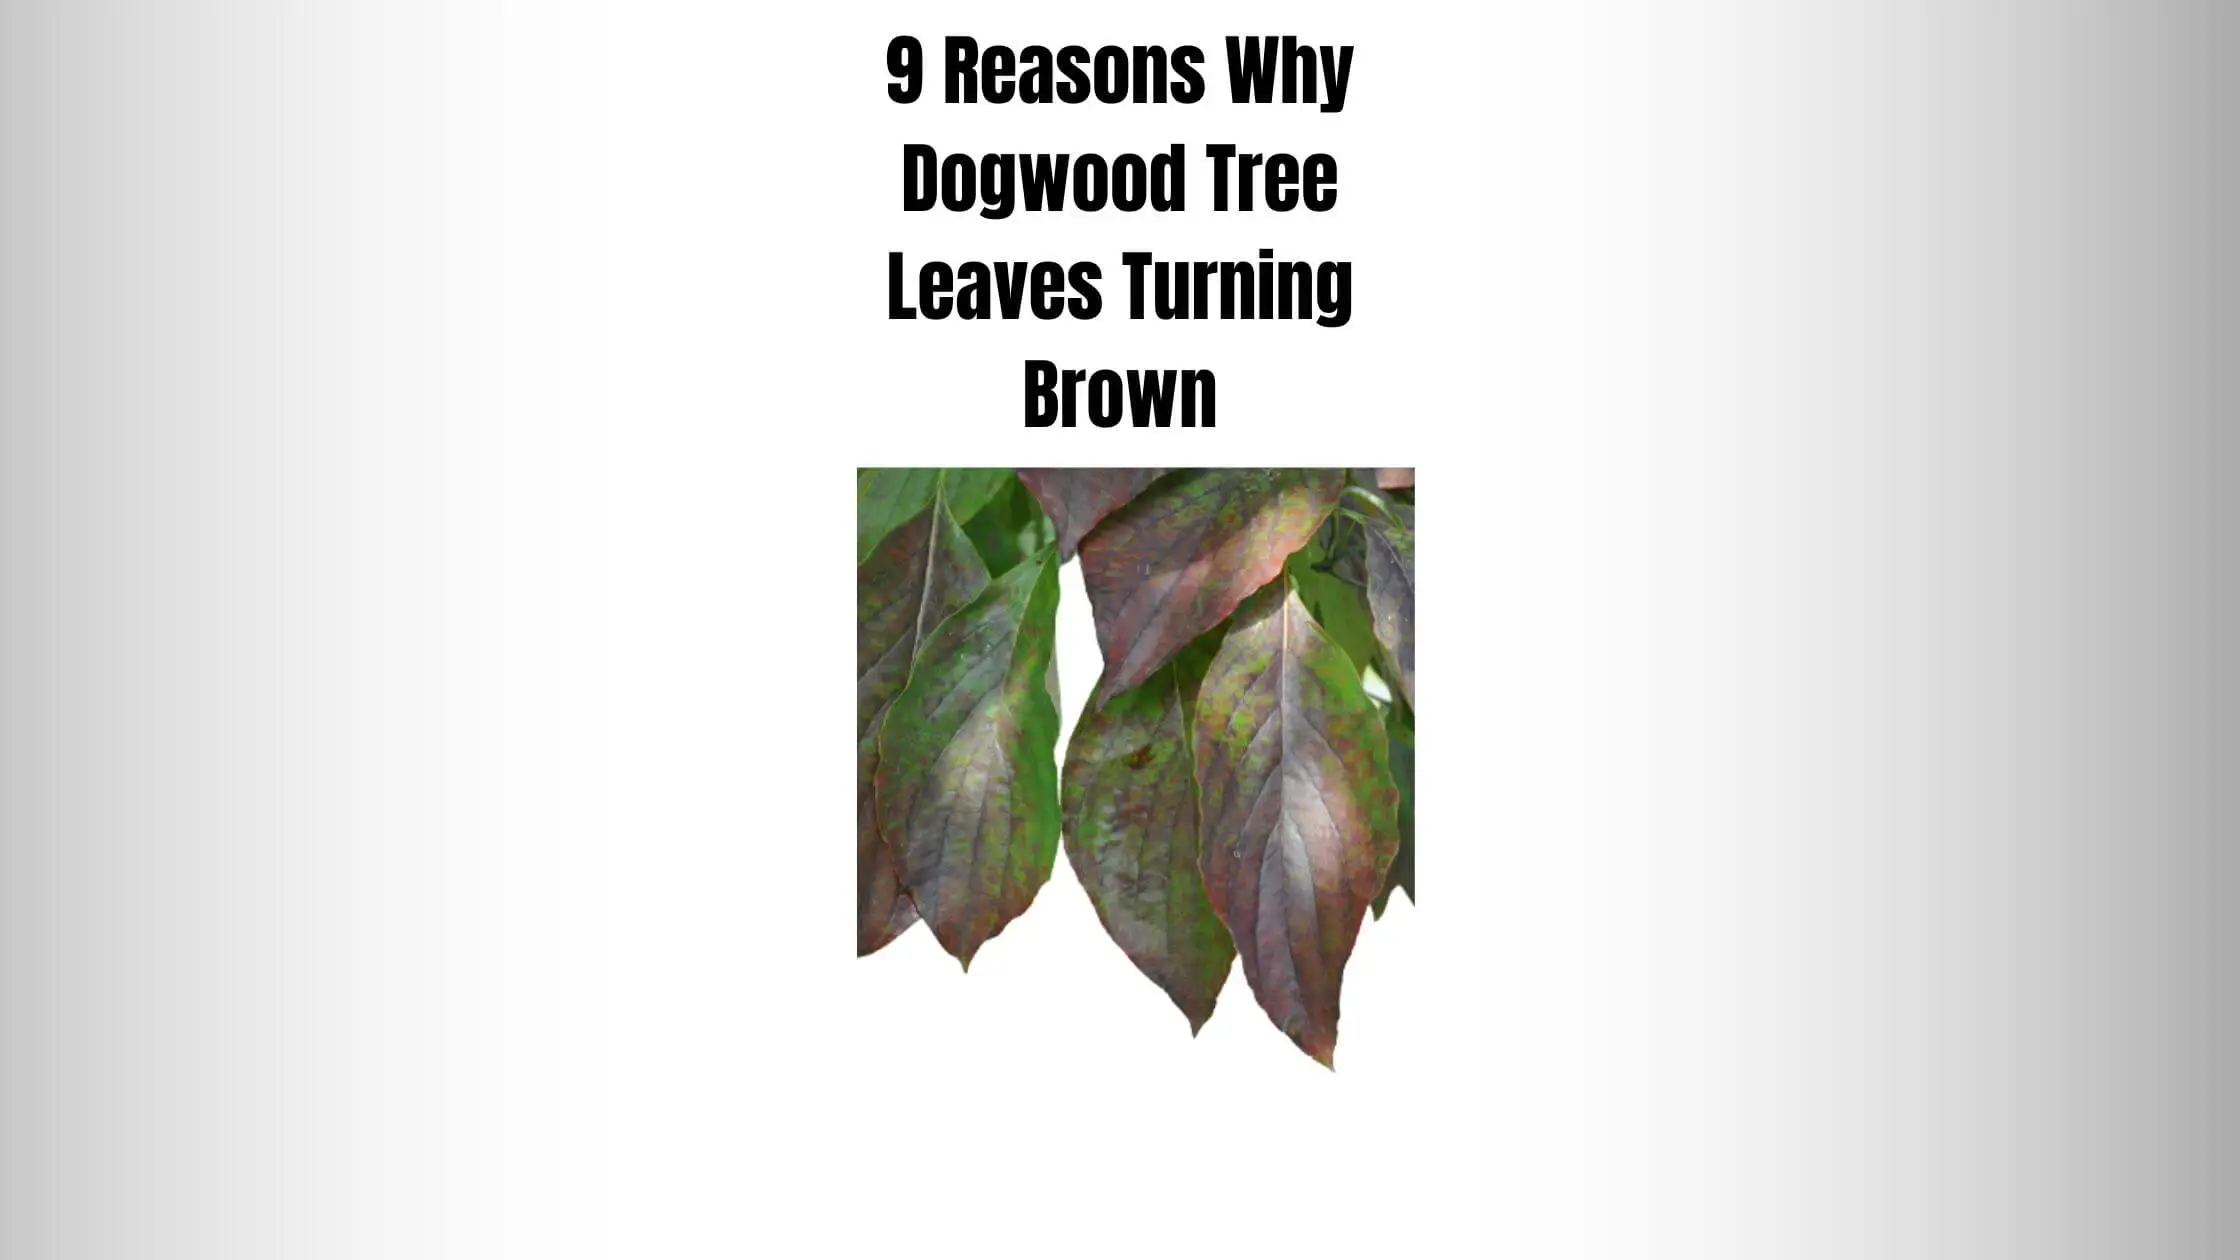 9 Reasons Why Dogwood Tree Leaves Turning Brown